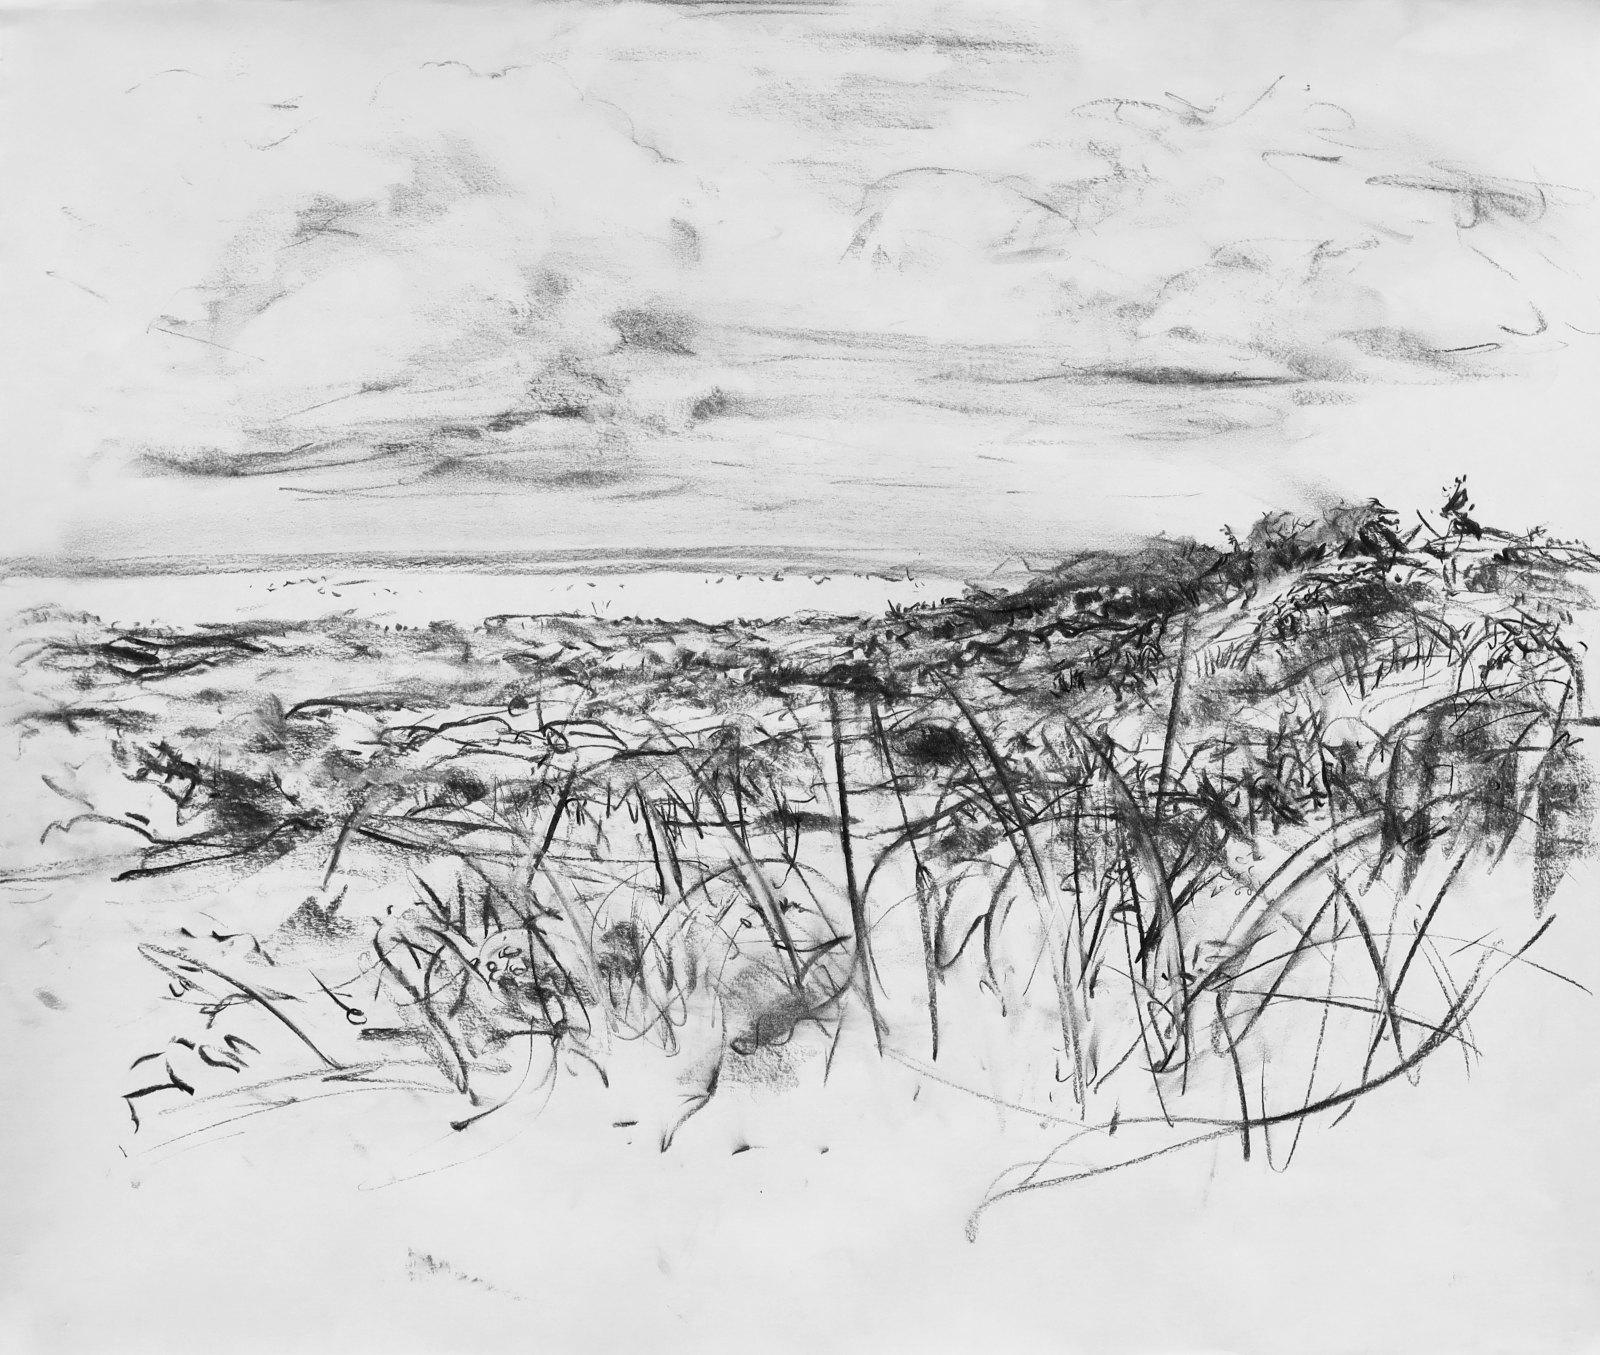 charcoal drawing of a view on dunes with dunes and sea in the background and clouds in the sky.